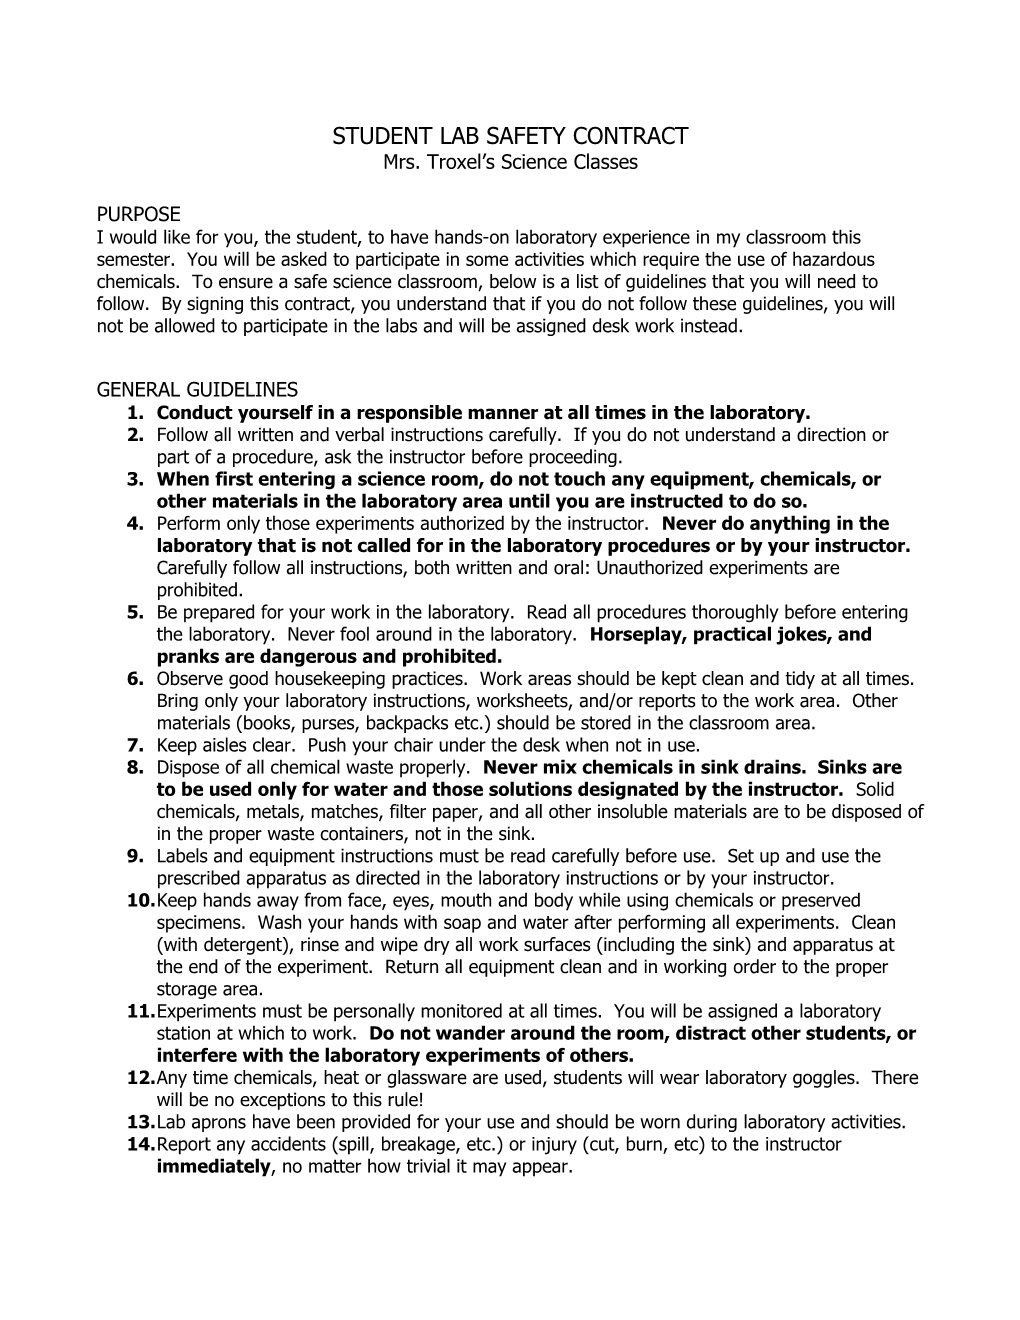 Student Safety Contract s1